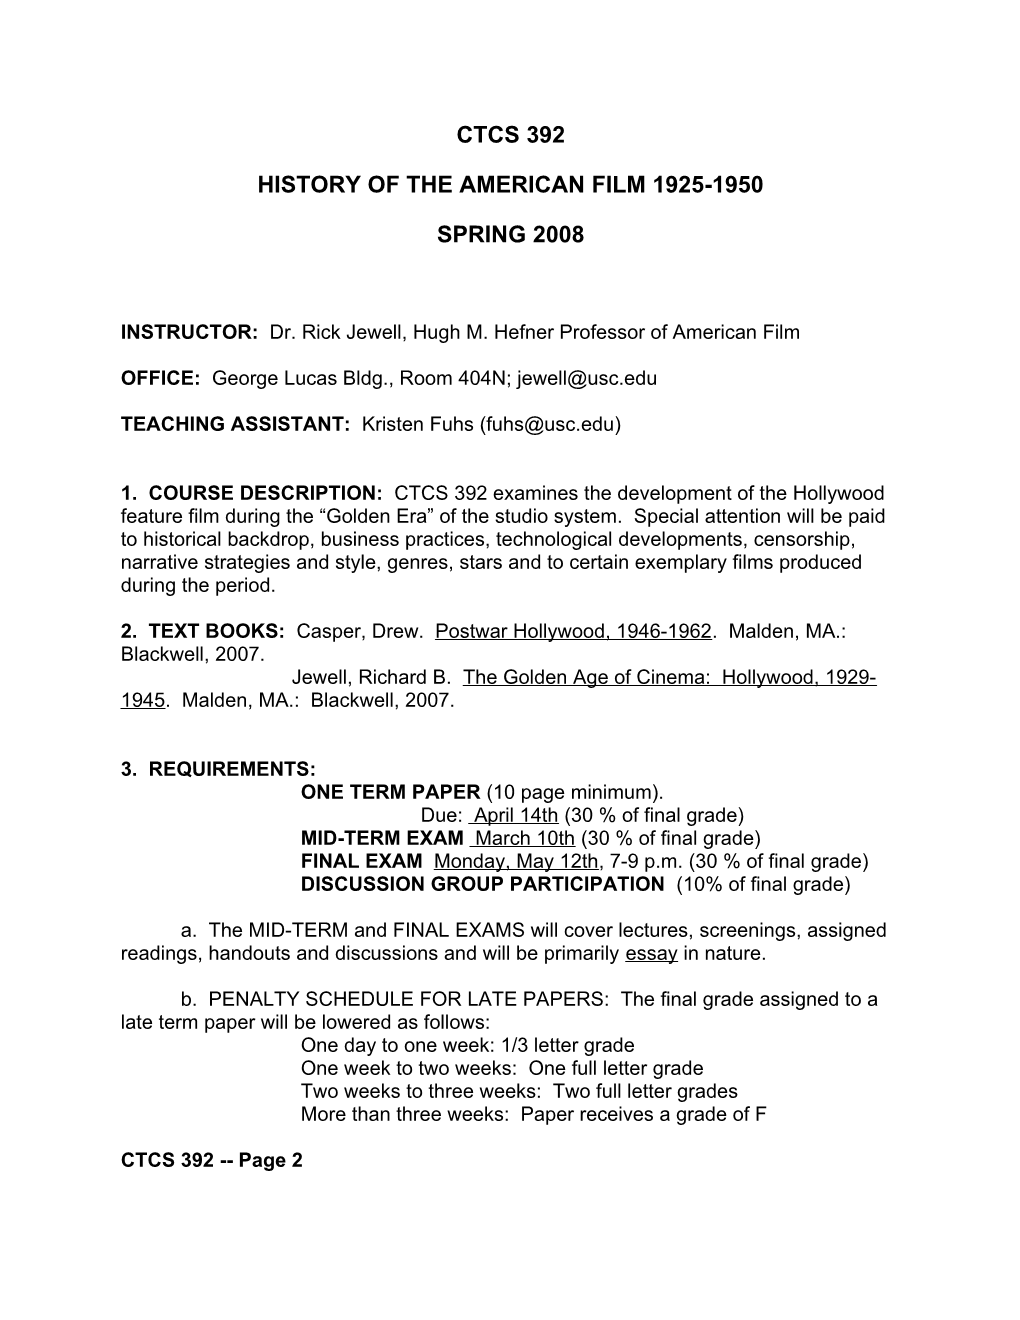 History of the American Film 1925-1950